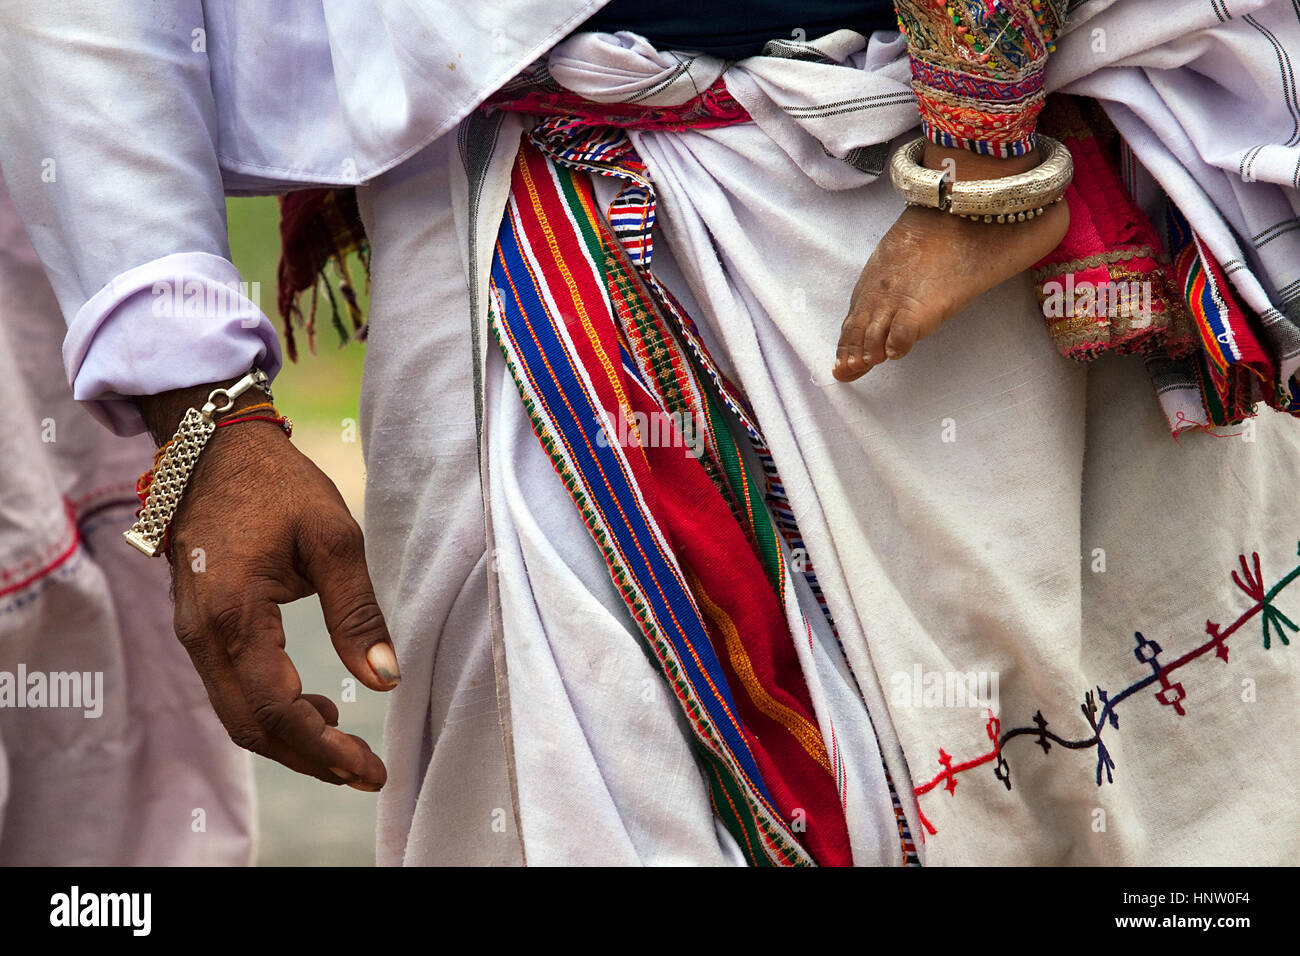 Hands and legs of father and son, from interior village of Kachchh, India, wearing traditional clothes and ornaments Stock Photo